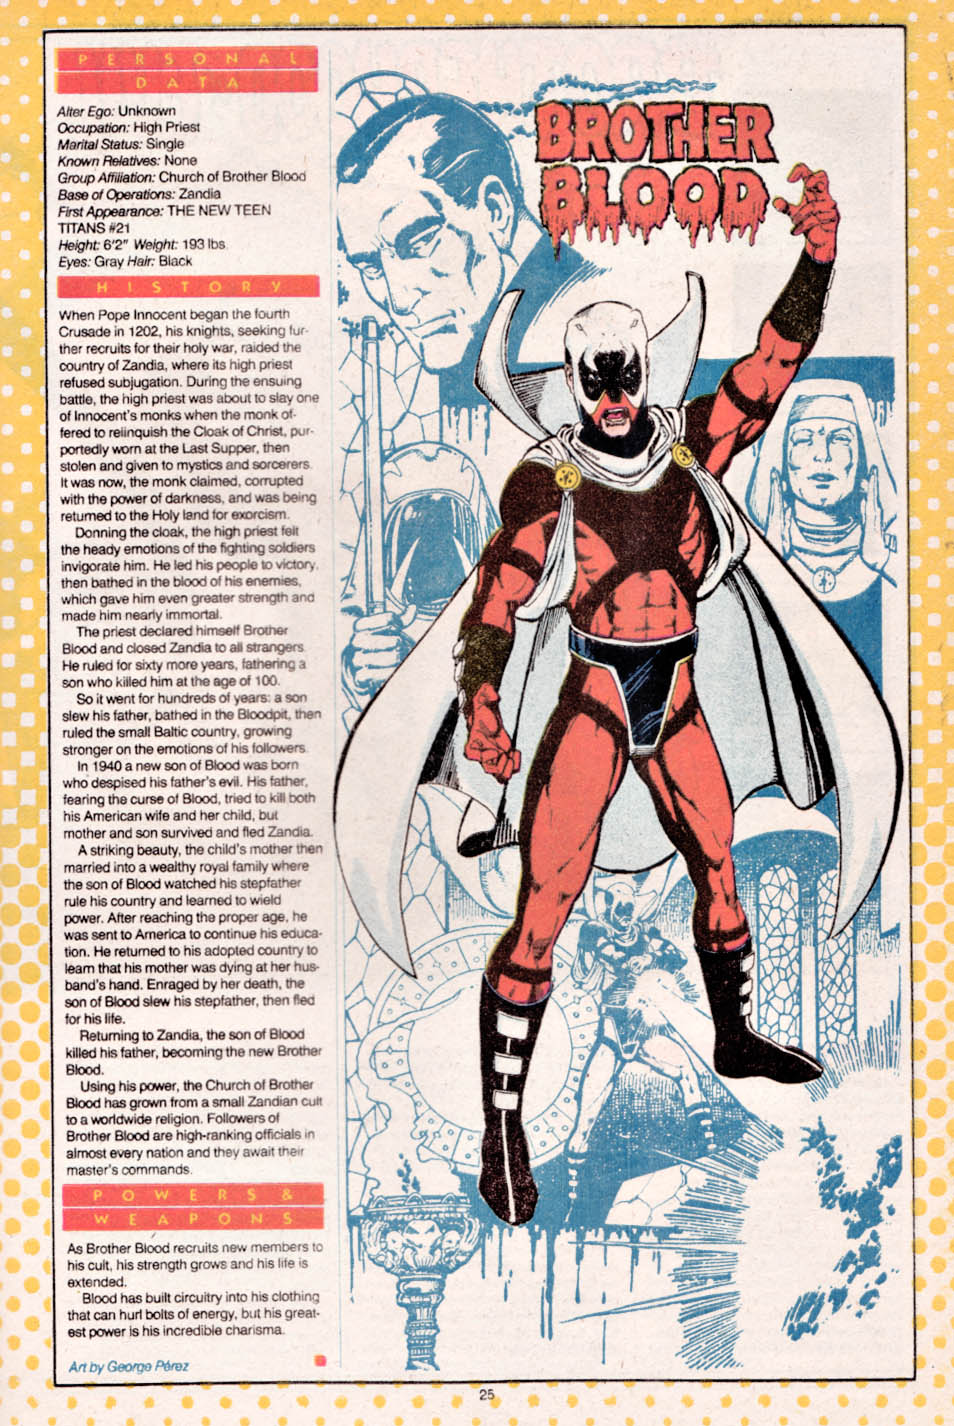 Brother Blood by George Perez - Who's Who: The Definitive Directory of the DC Universe #3